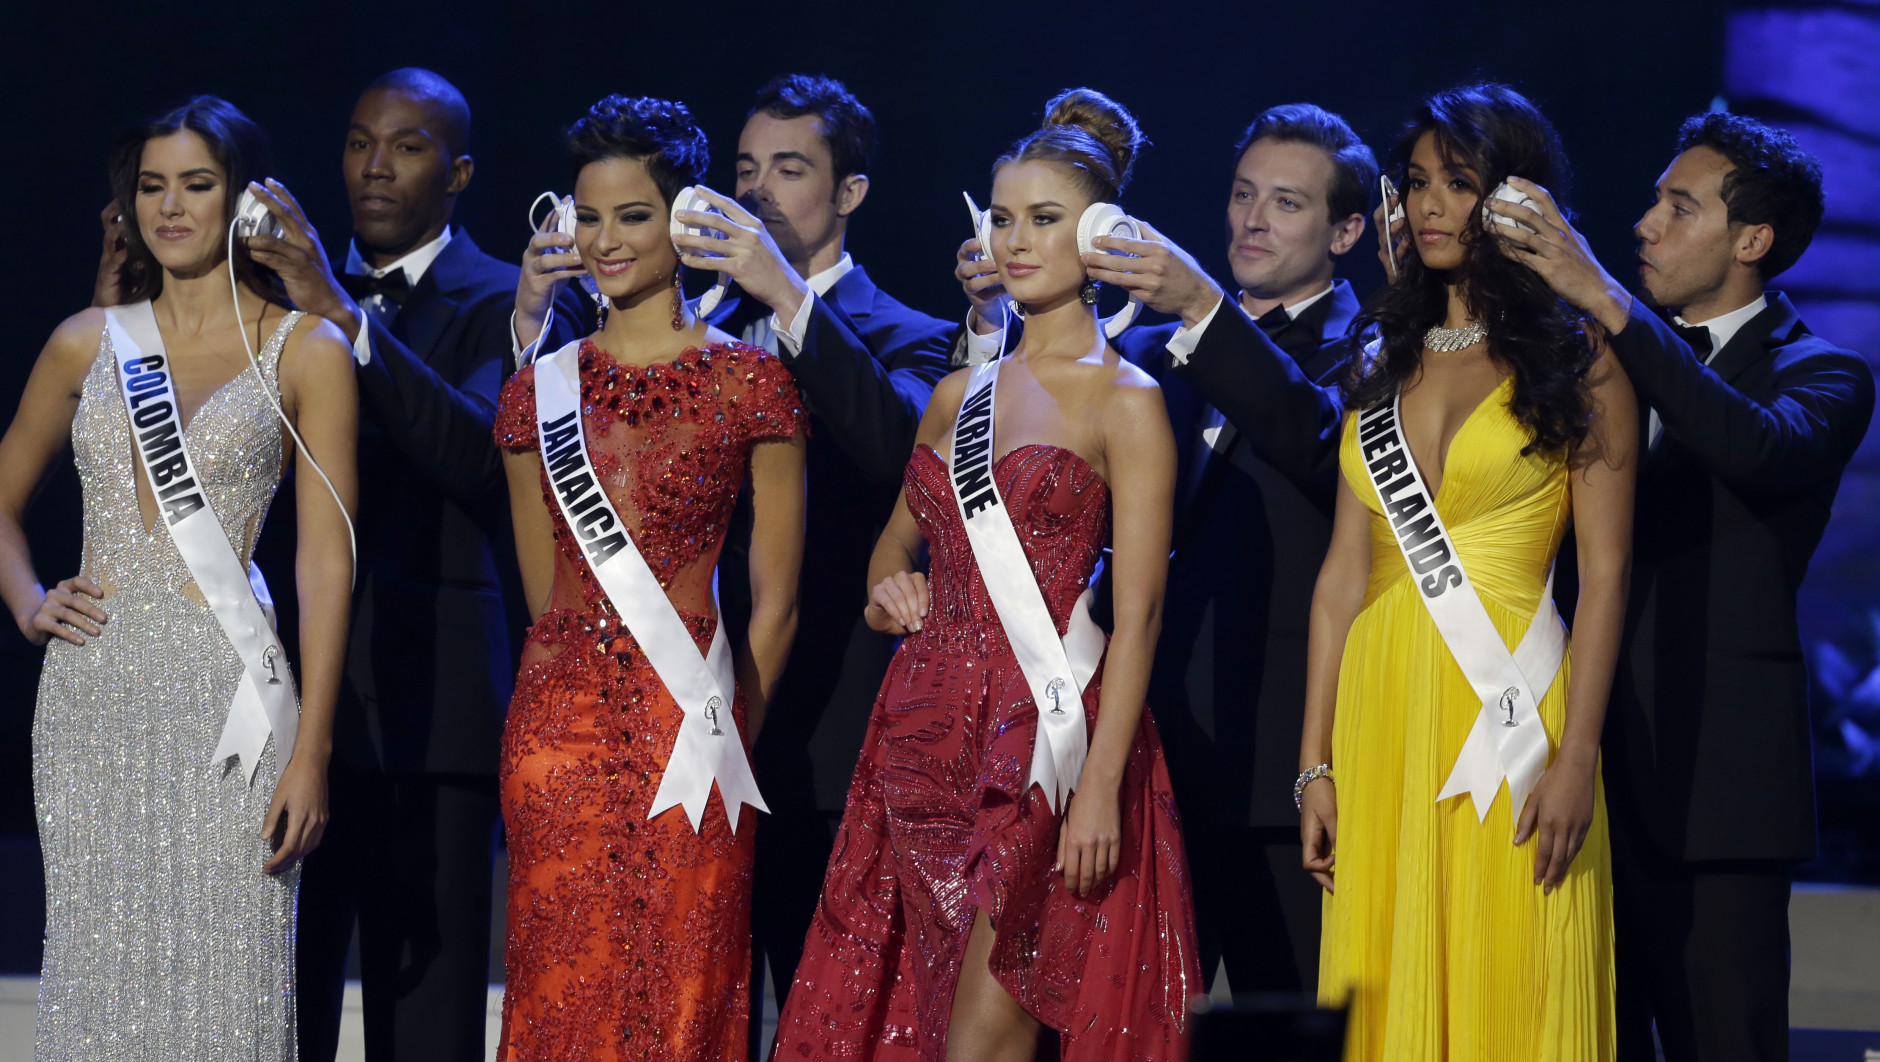 From left, Miss Colombia Paulina Vega, Miss Jamaica  Kaci Fennell, Miss Ukraine Diana Harkusha, and Miss Netherlands Yasmin Verheijen have their ears covered during a question and answer at the Miss Universe pageant in Miami, Sunday, Jan. 25, 2015. (AP Photo/Wilfredo Lee)